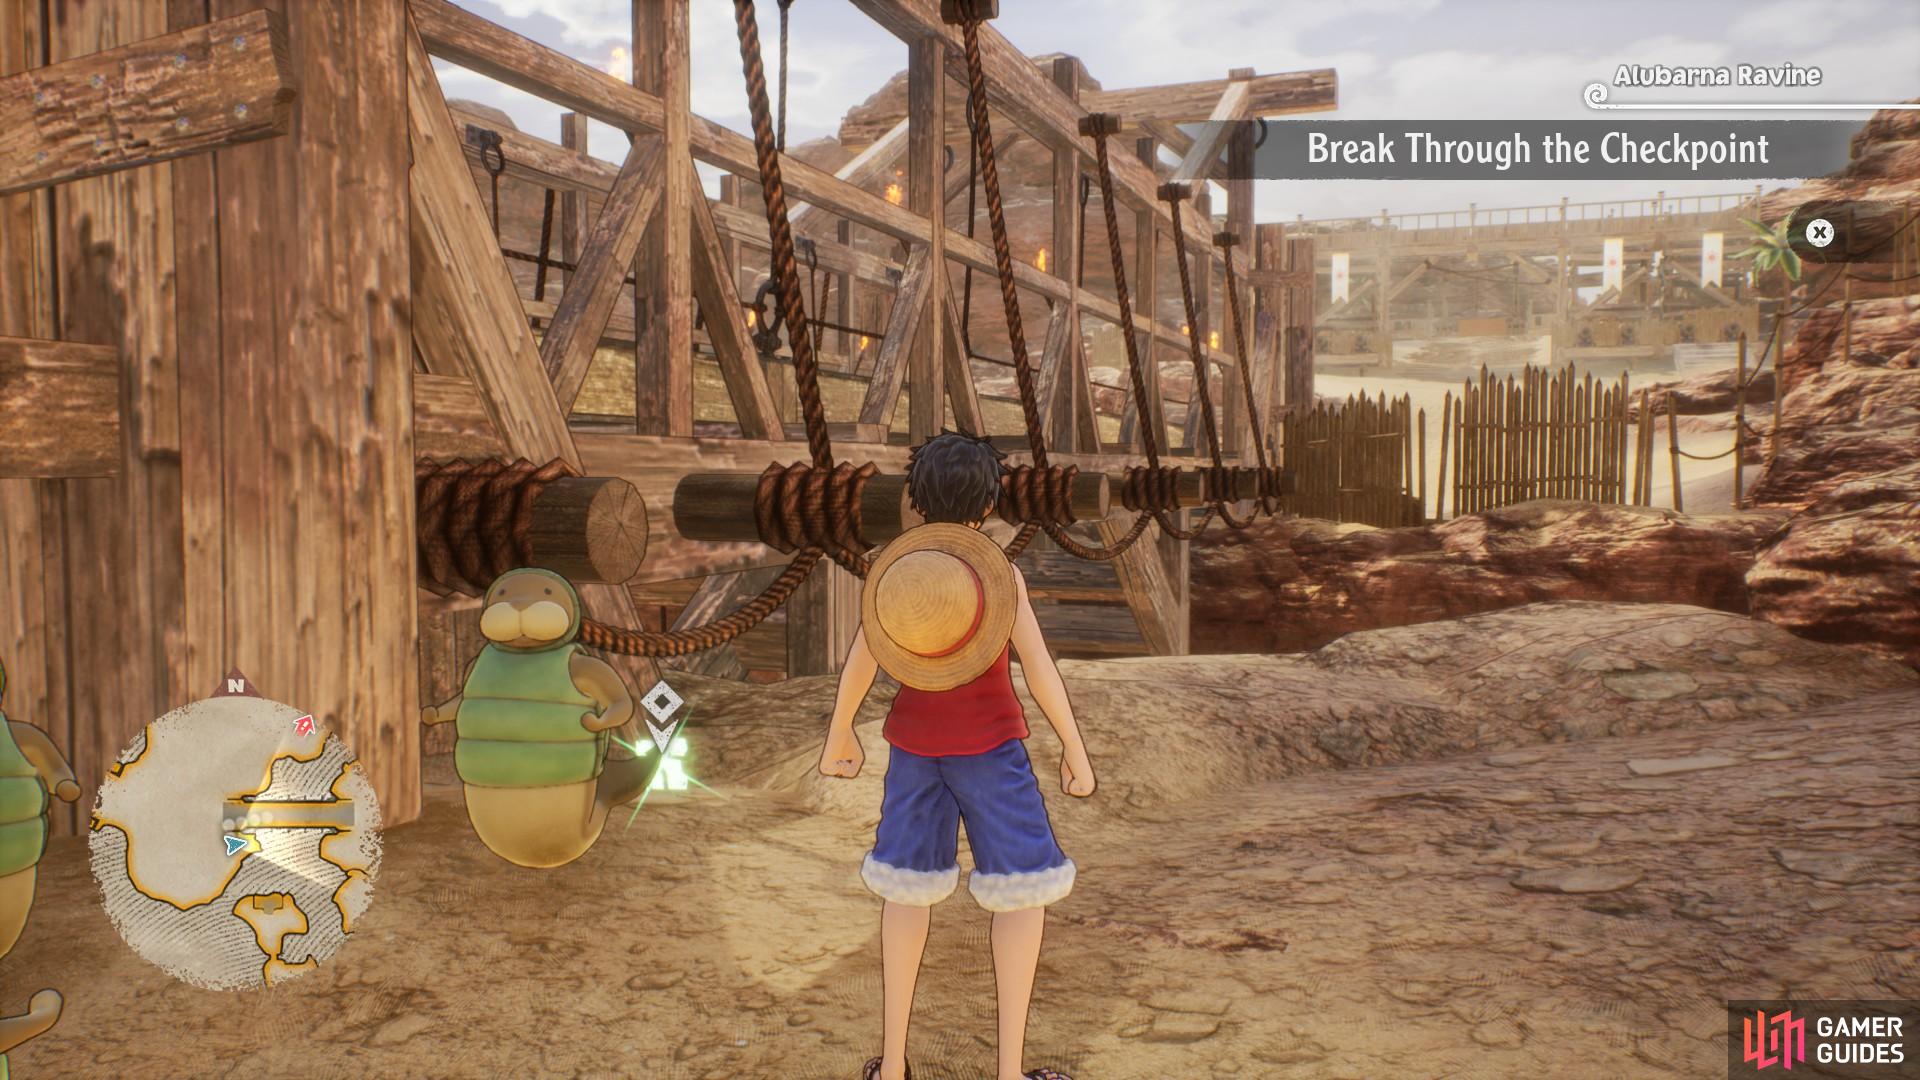 One Piece Odyssey can take many hours to complete if you wish to see everything that the game has to offer..